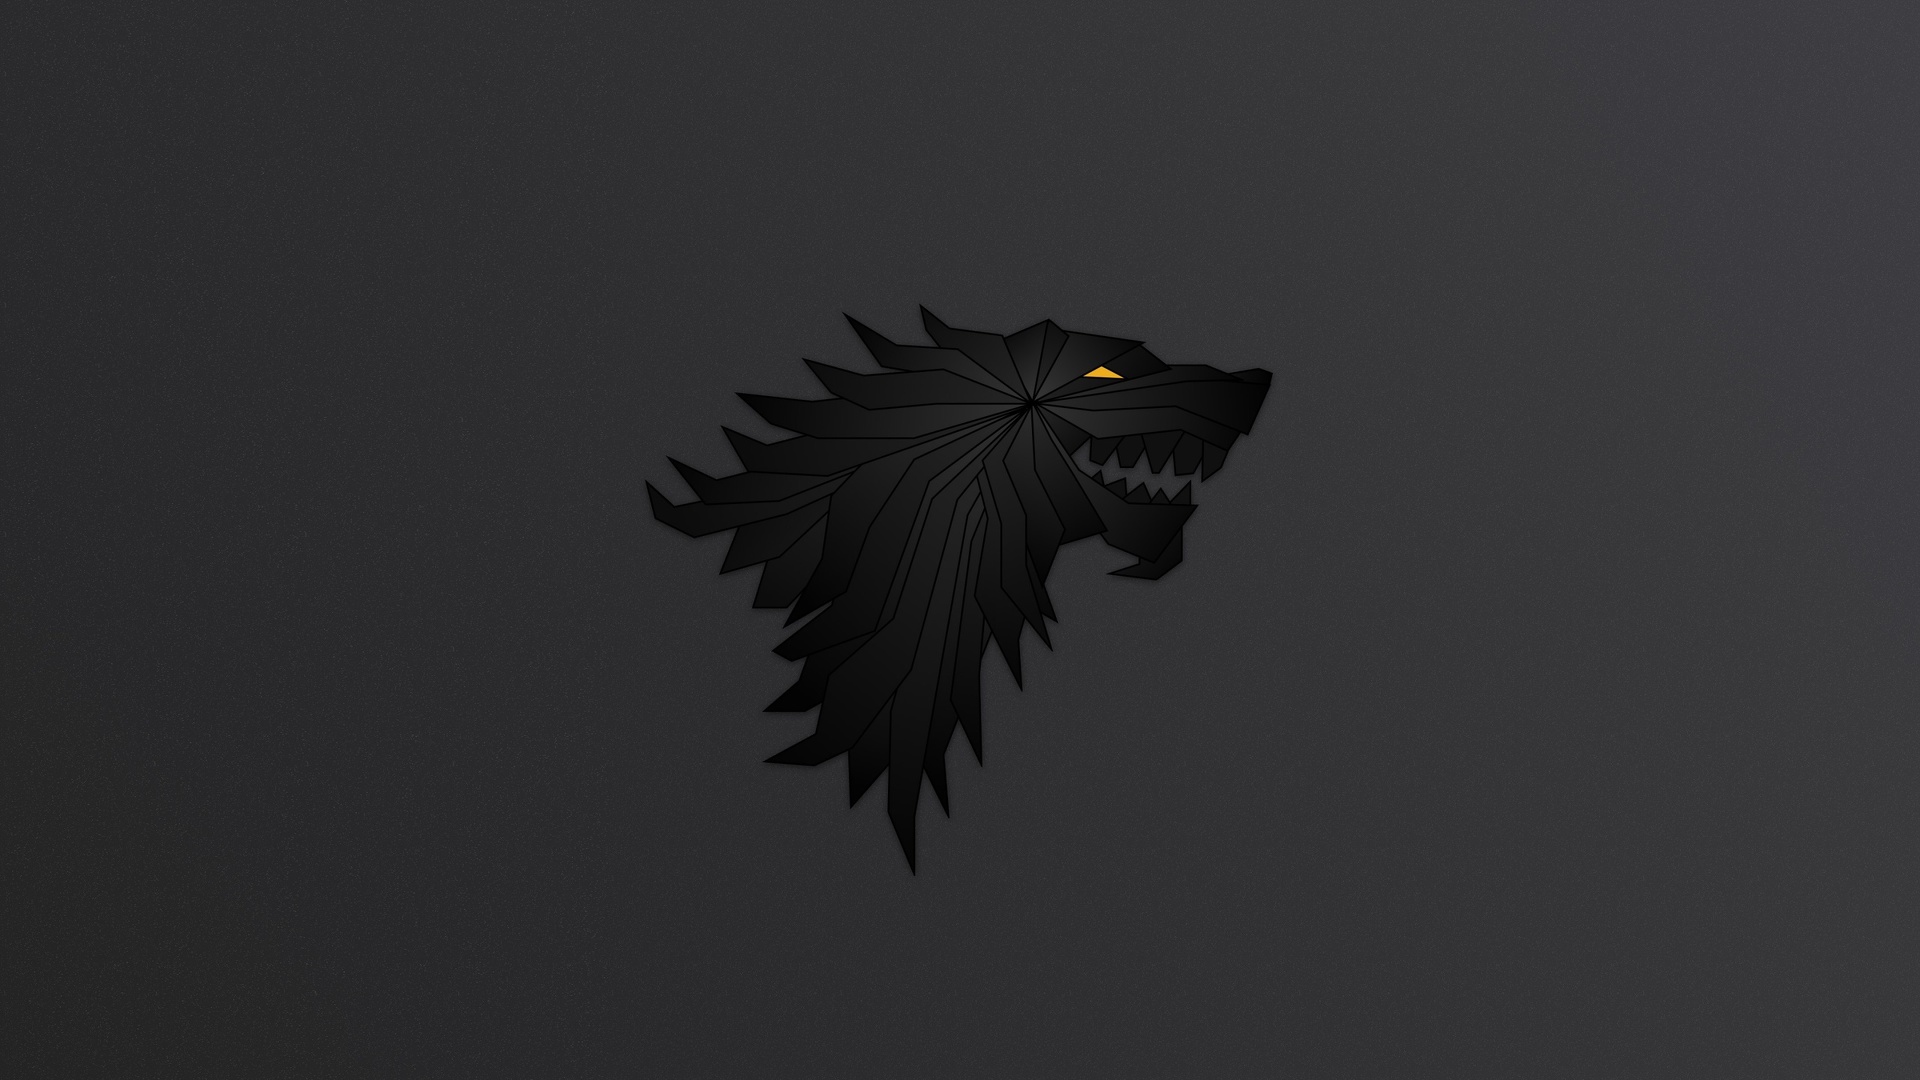 Game of thrones - loup - graphisme.jpg